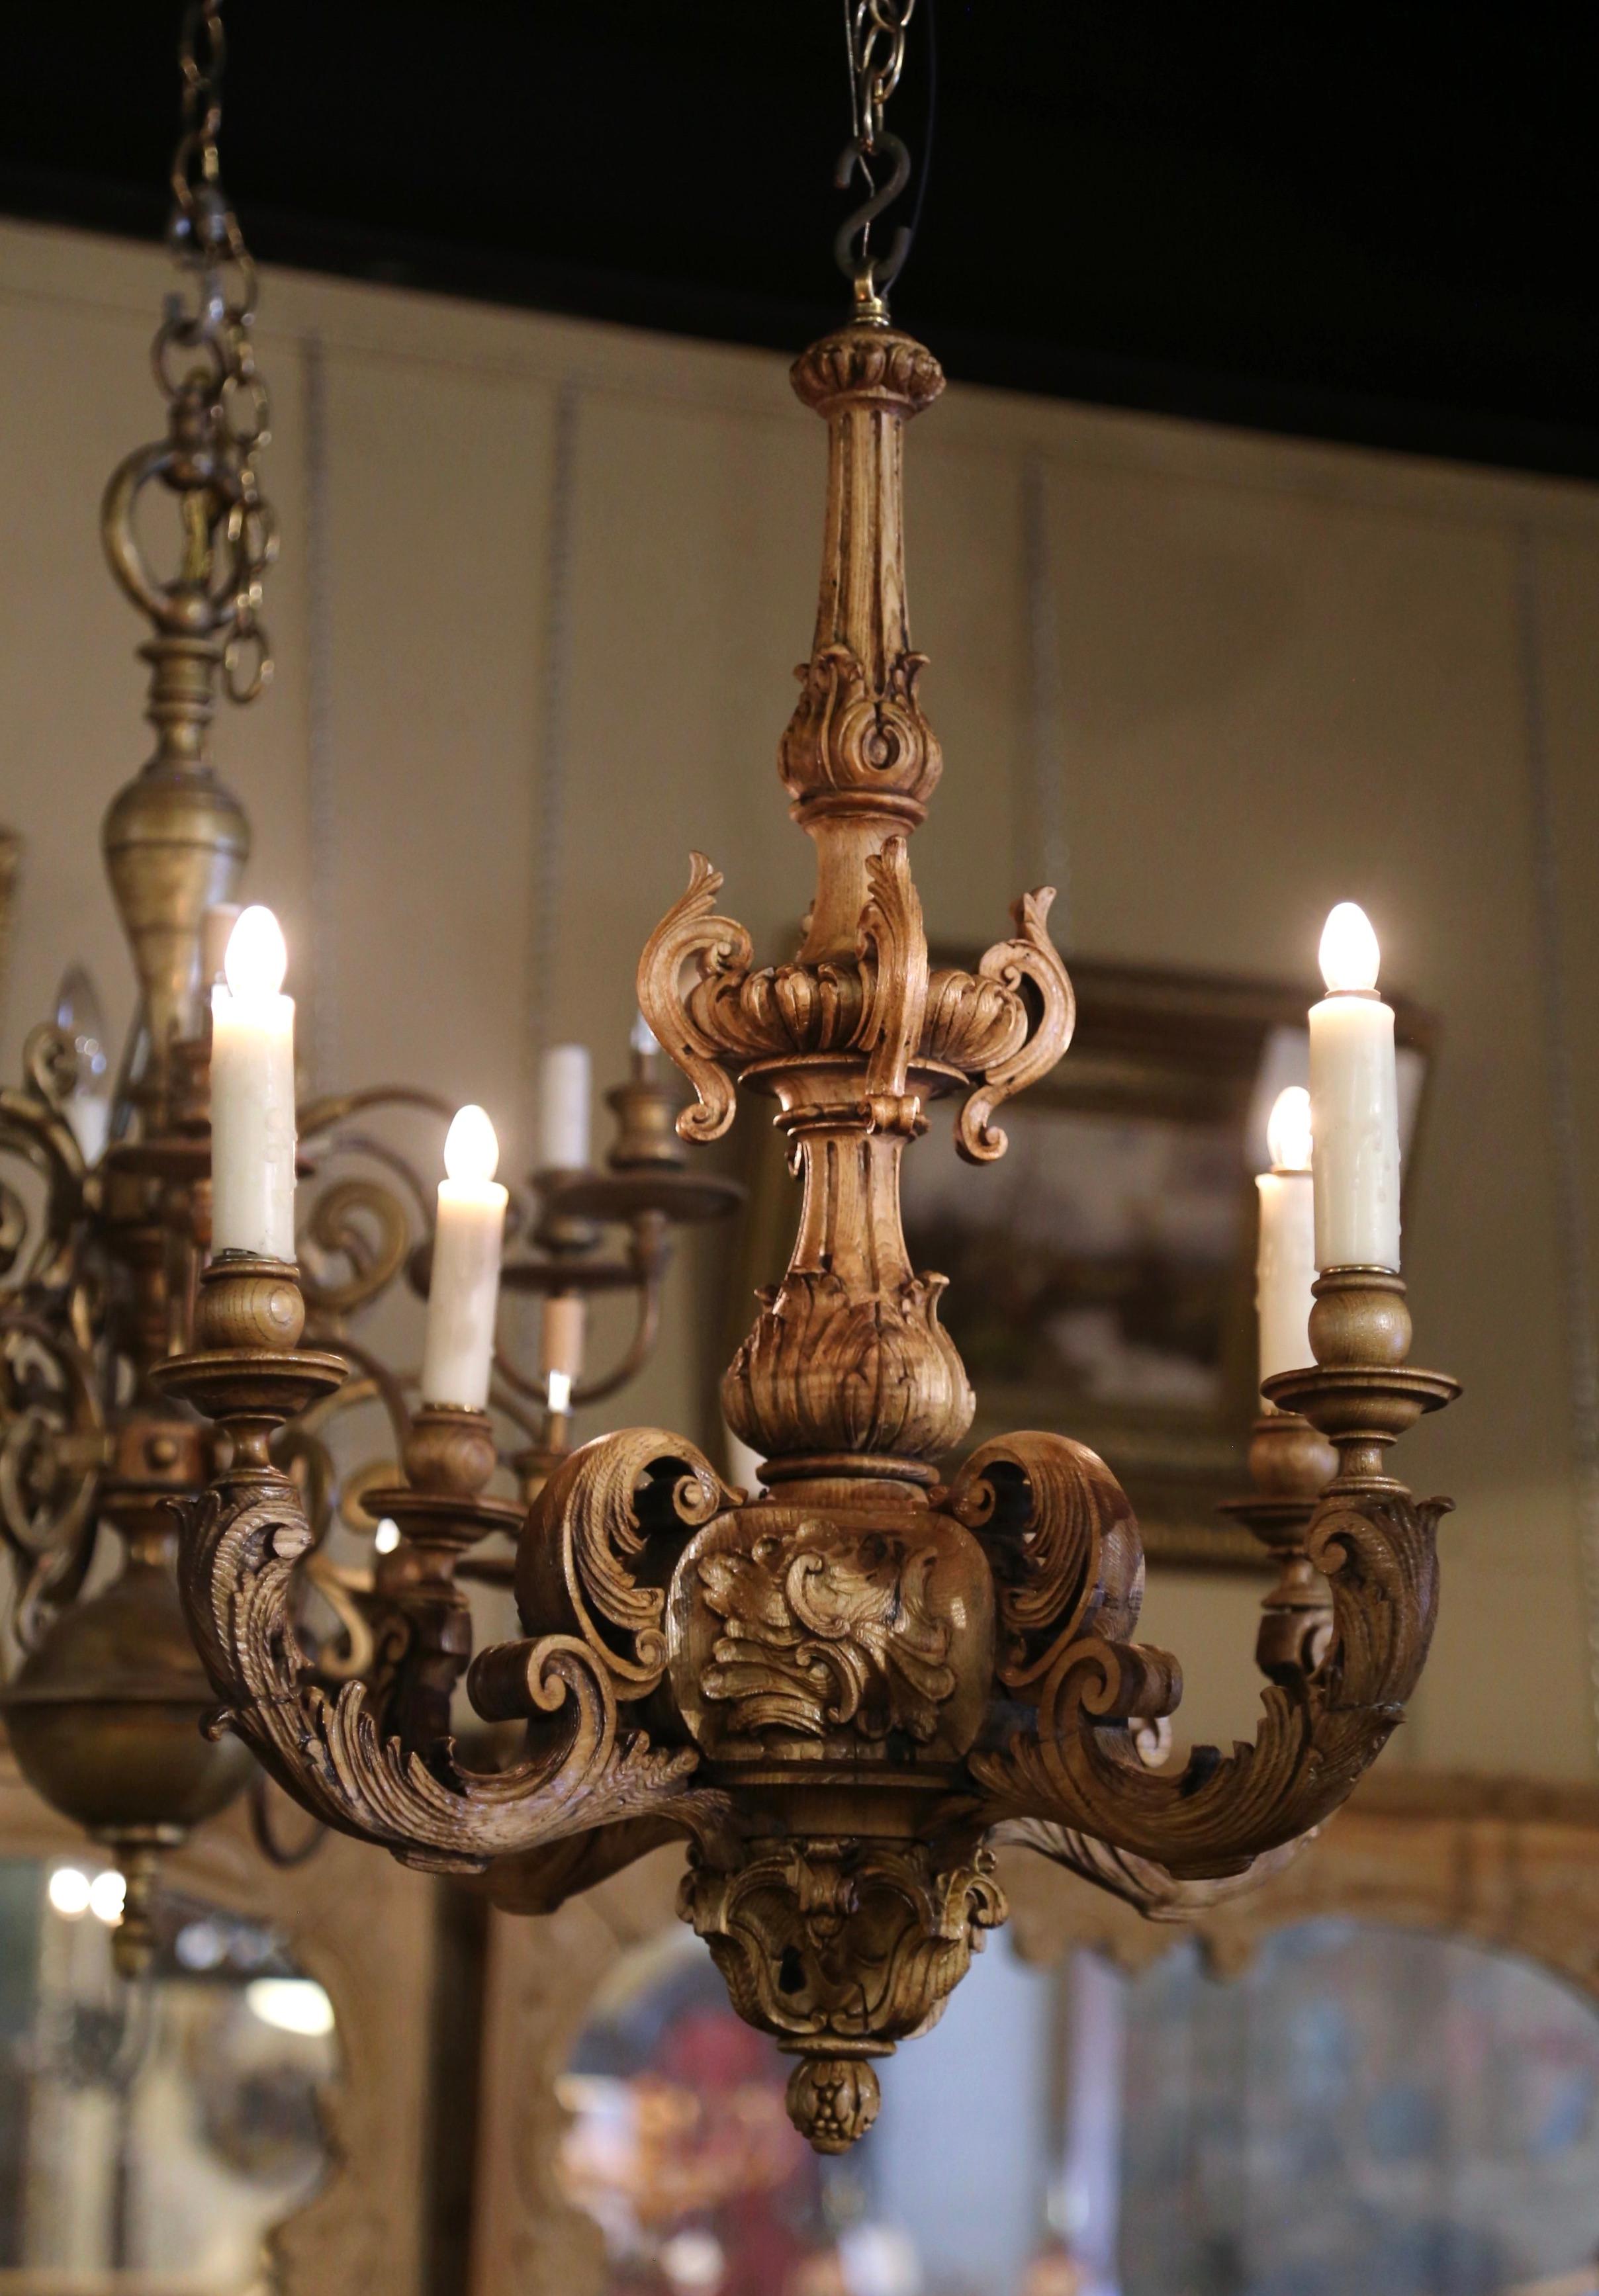 Decorate a dining room or a den with this elegant antique wooden chandelier. Crafted in France circa 1880, the light fixture is round in shape and features four arms of equal lengths around the thick intricately carved central stem; each curled arm